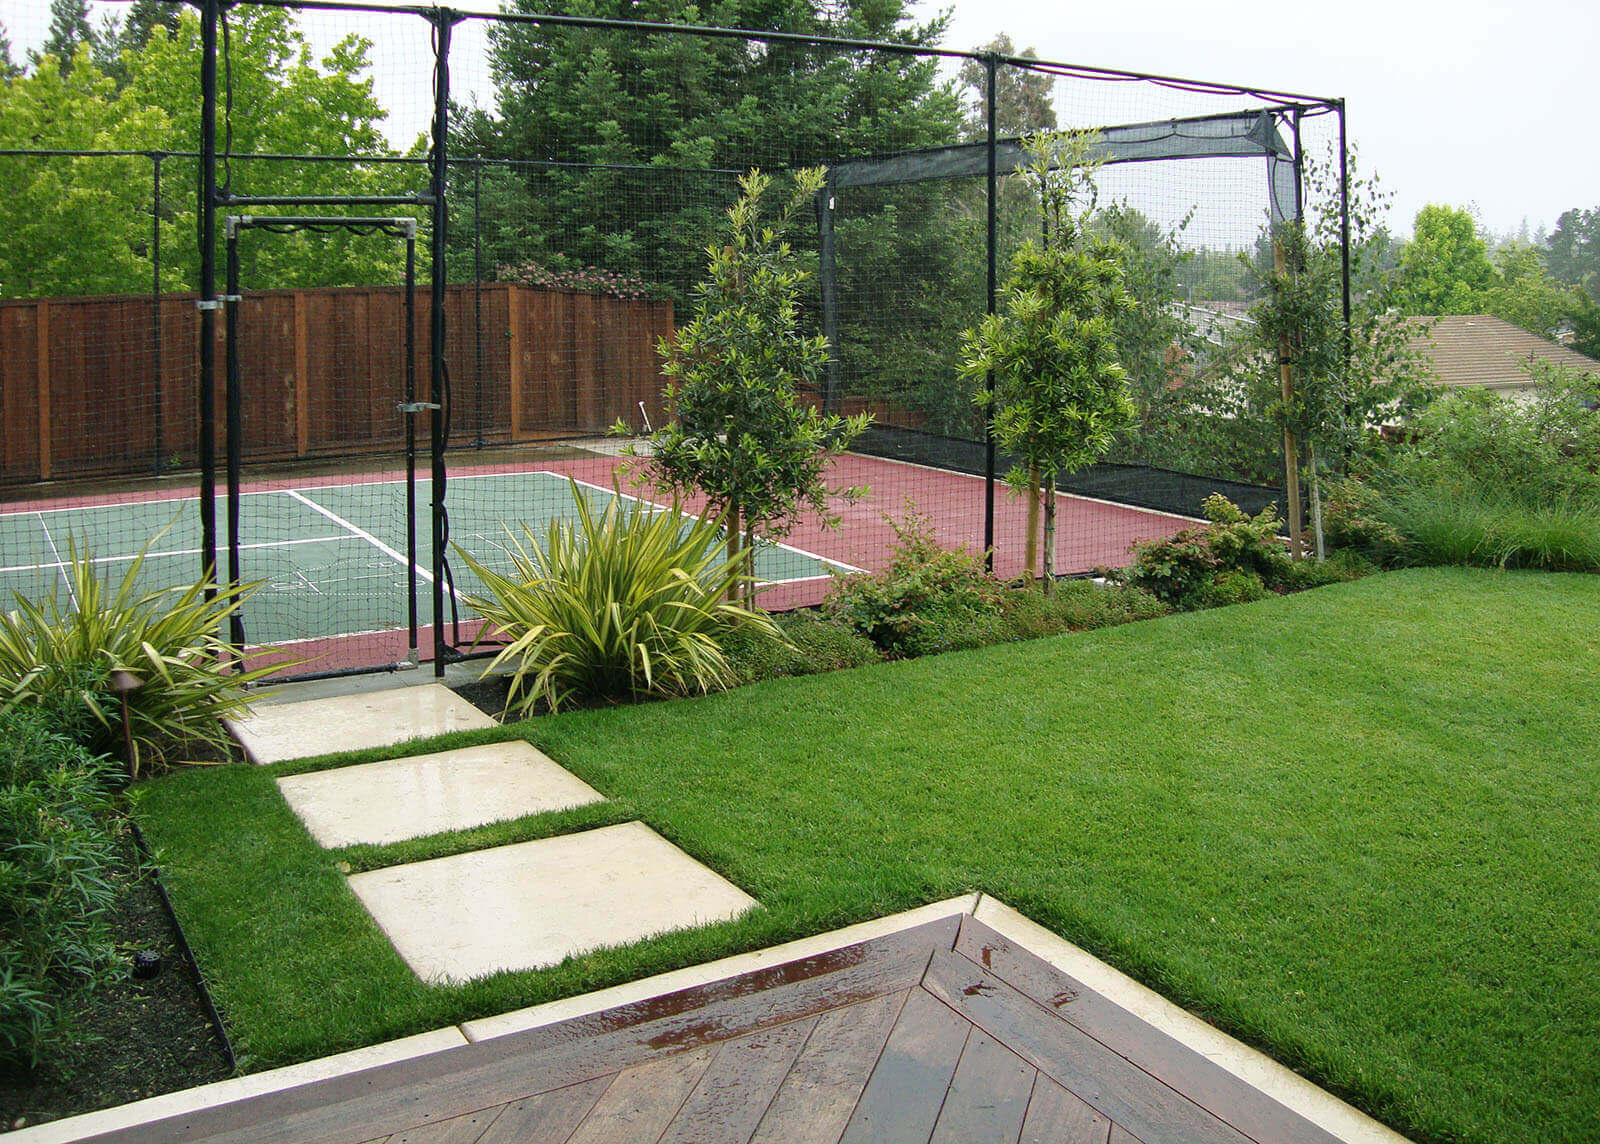 white tile-lined wooden deck with short stairs, and white stepping stones to fenced tennis court